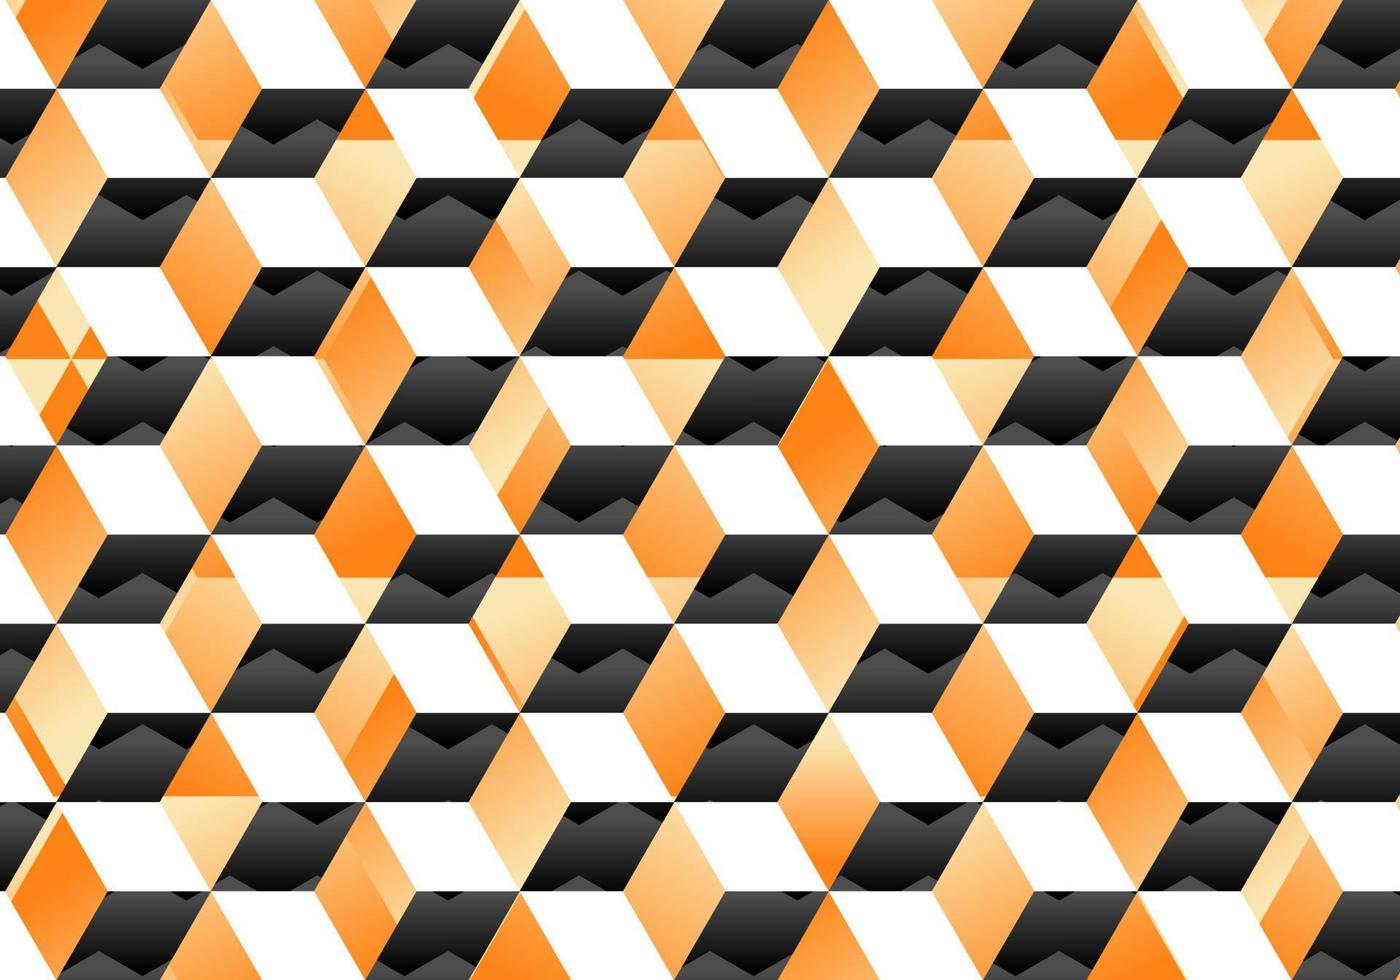 Abstract orange and black cubes background vector image